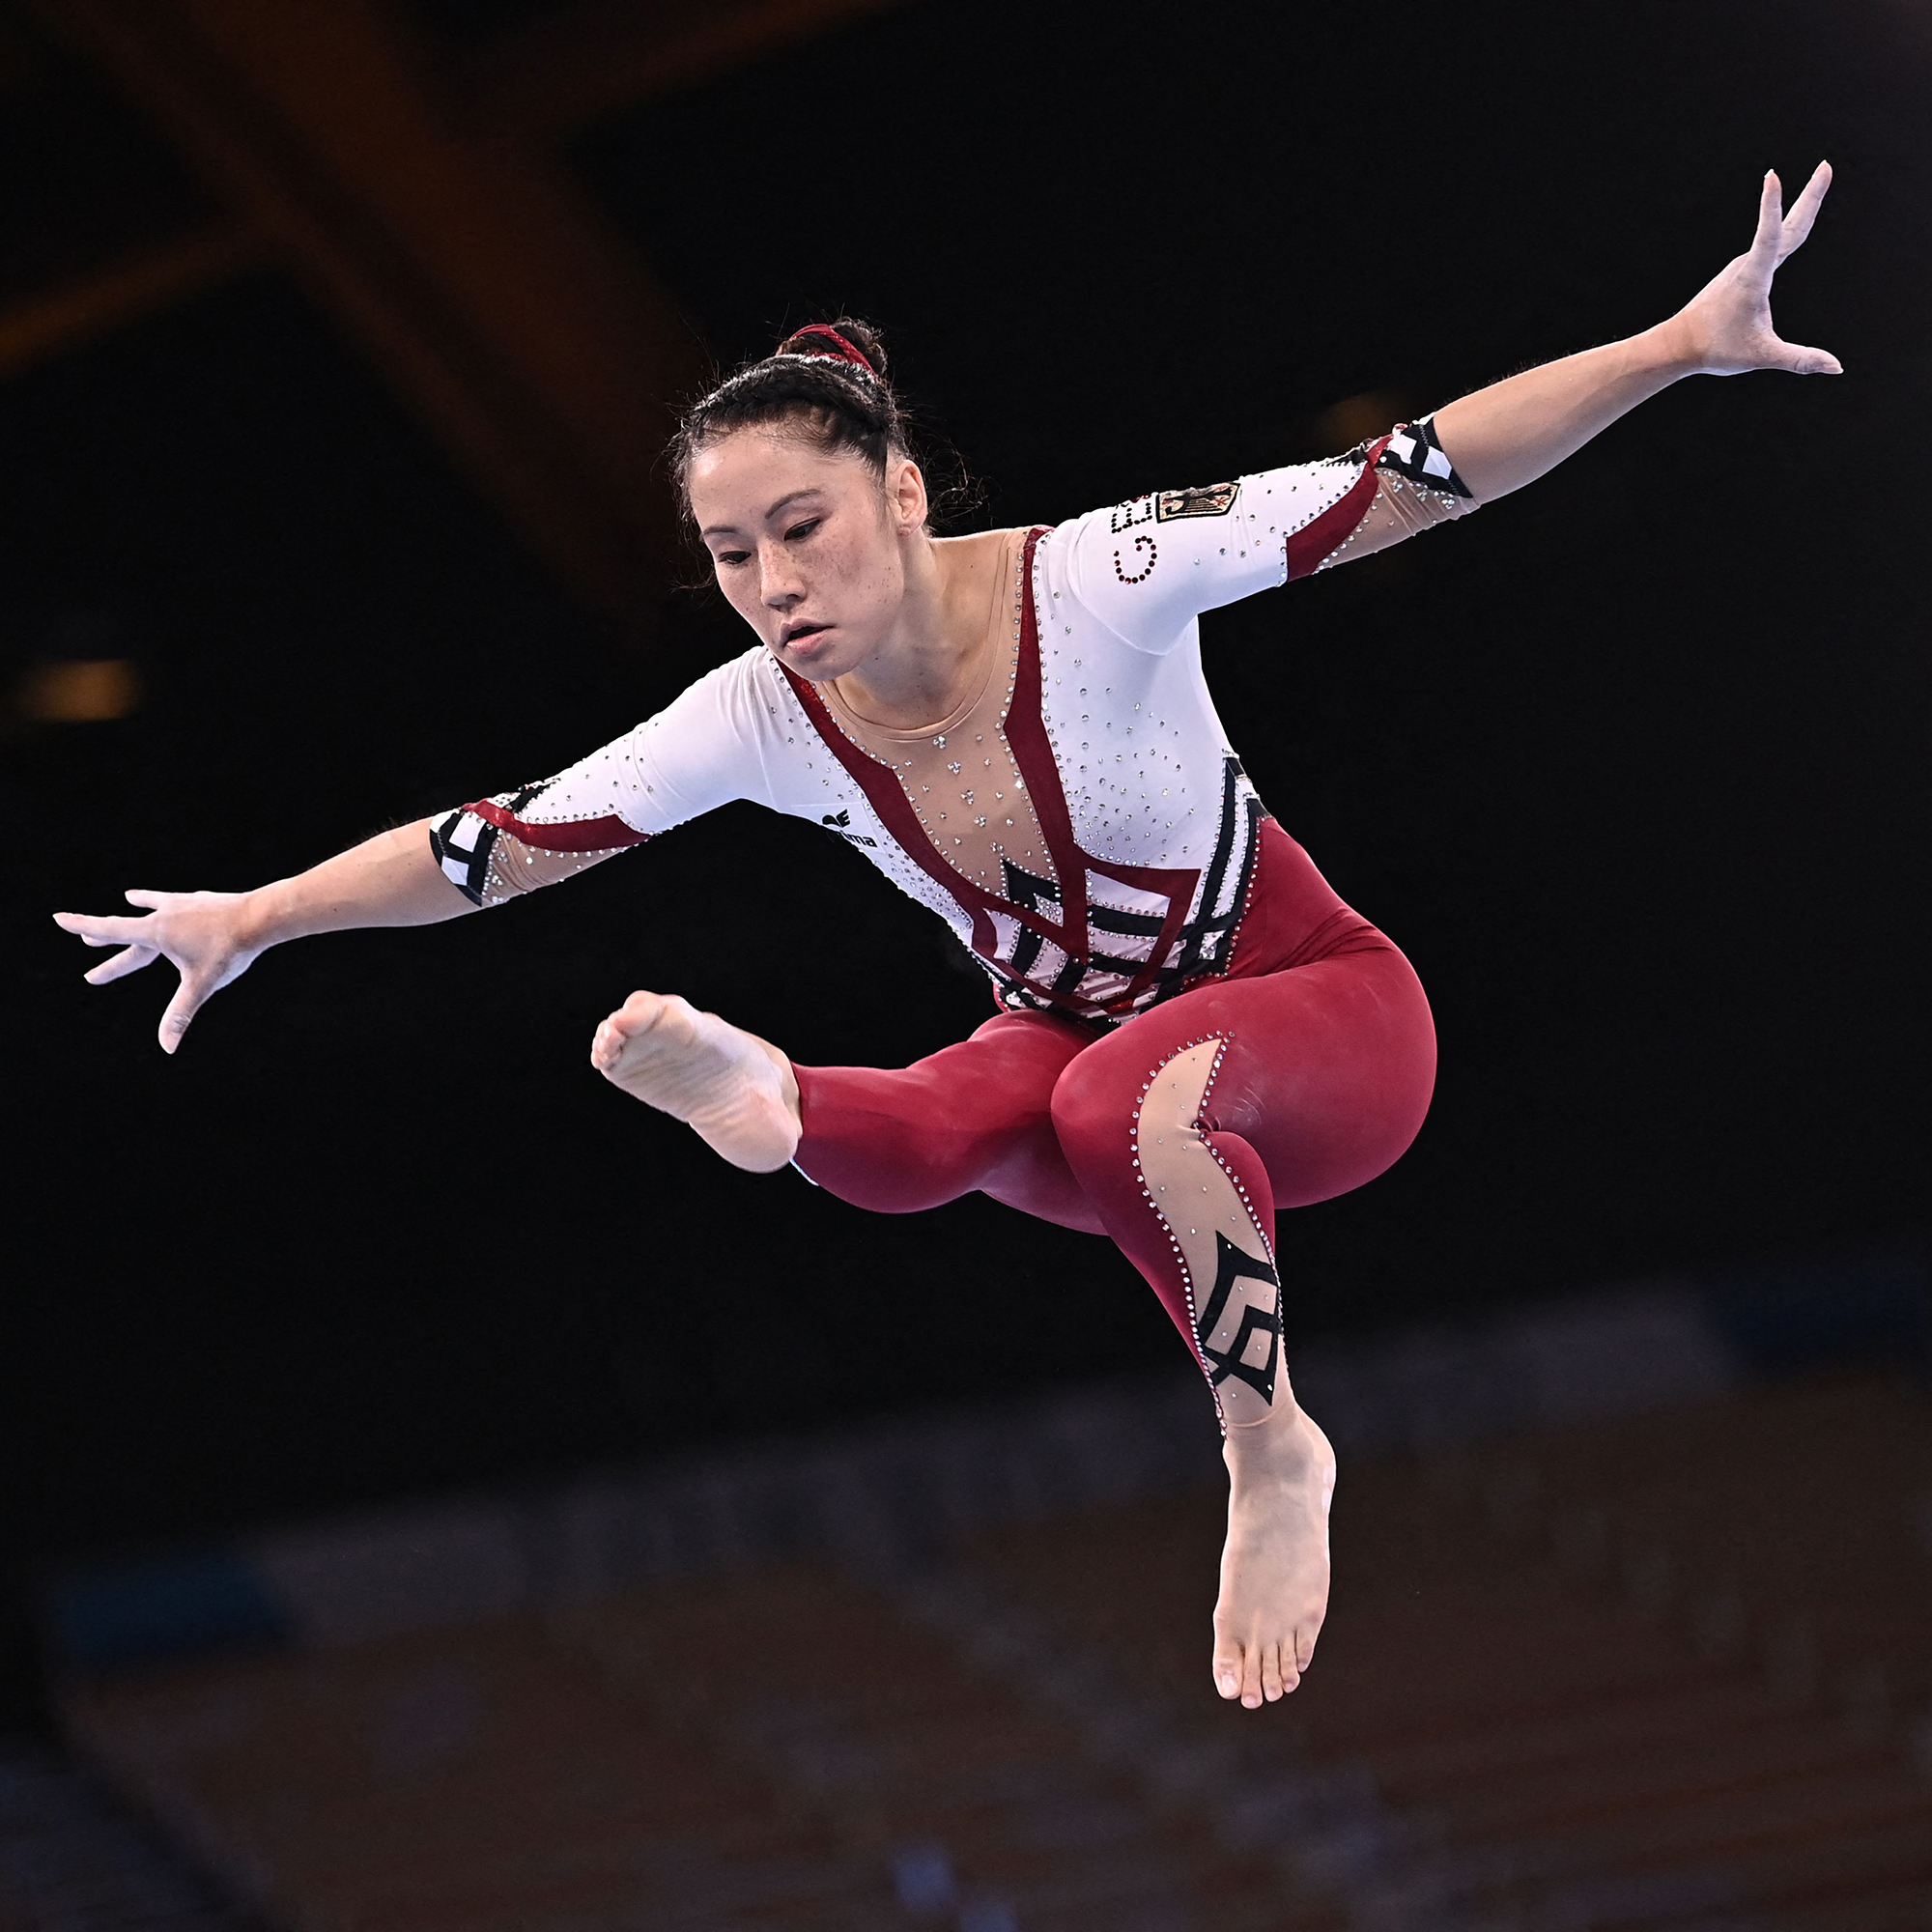 German Olympic gymnasts' uniforms are a stand 'against sexualization'